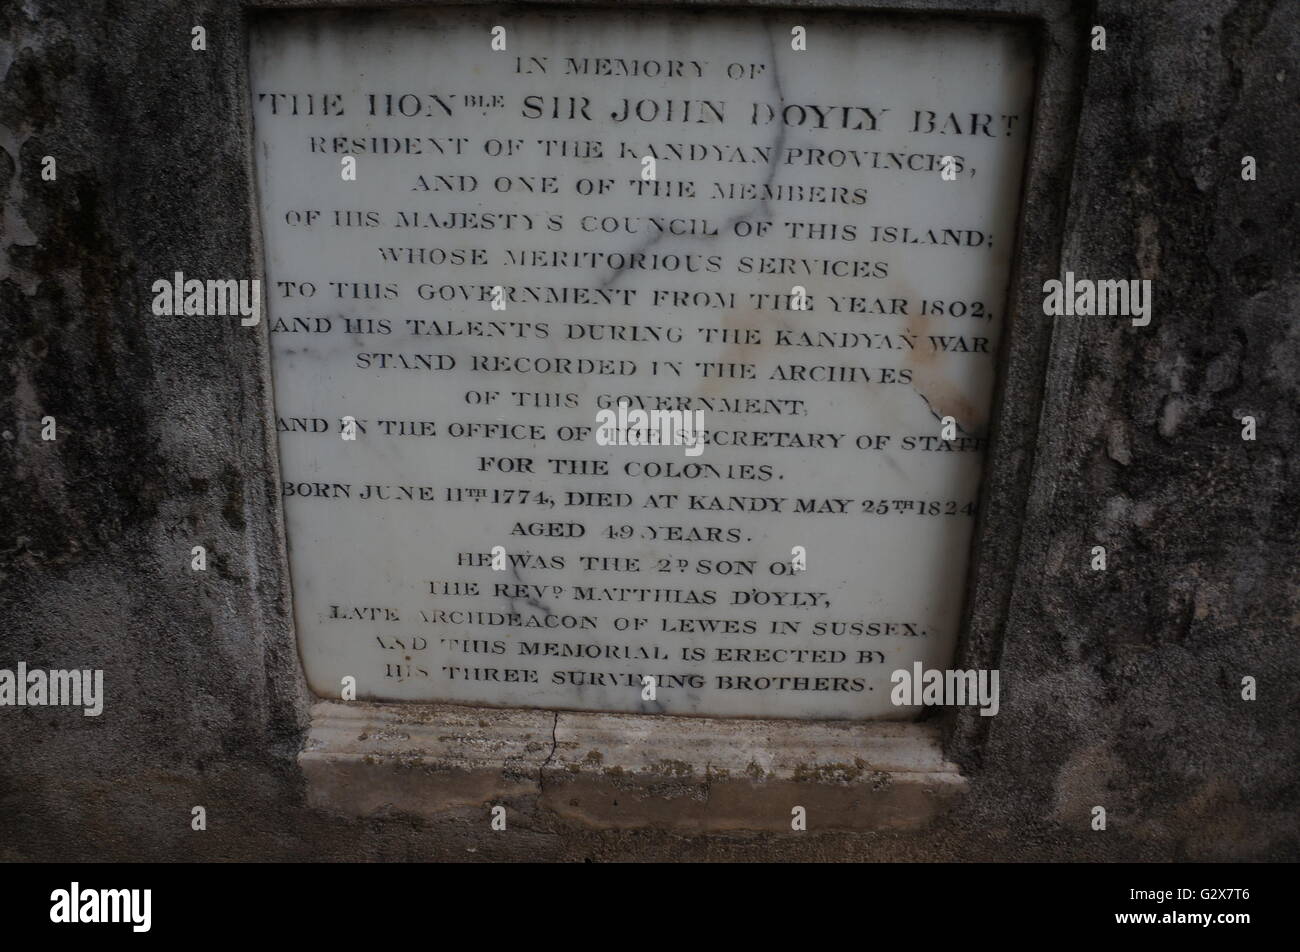 Headstone of Sir John D'Oyly, 1st Baronet of Kandy, at Kandy Garrison Cemetery, Kandy, Sri Lanka, known as the Sinhalese hermit Stock Photo